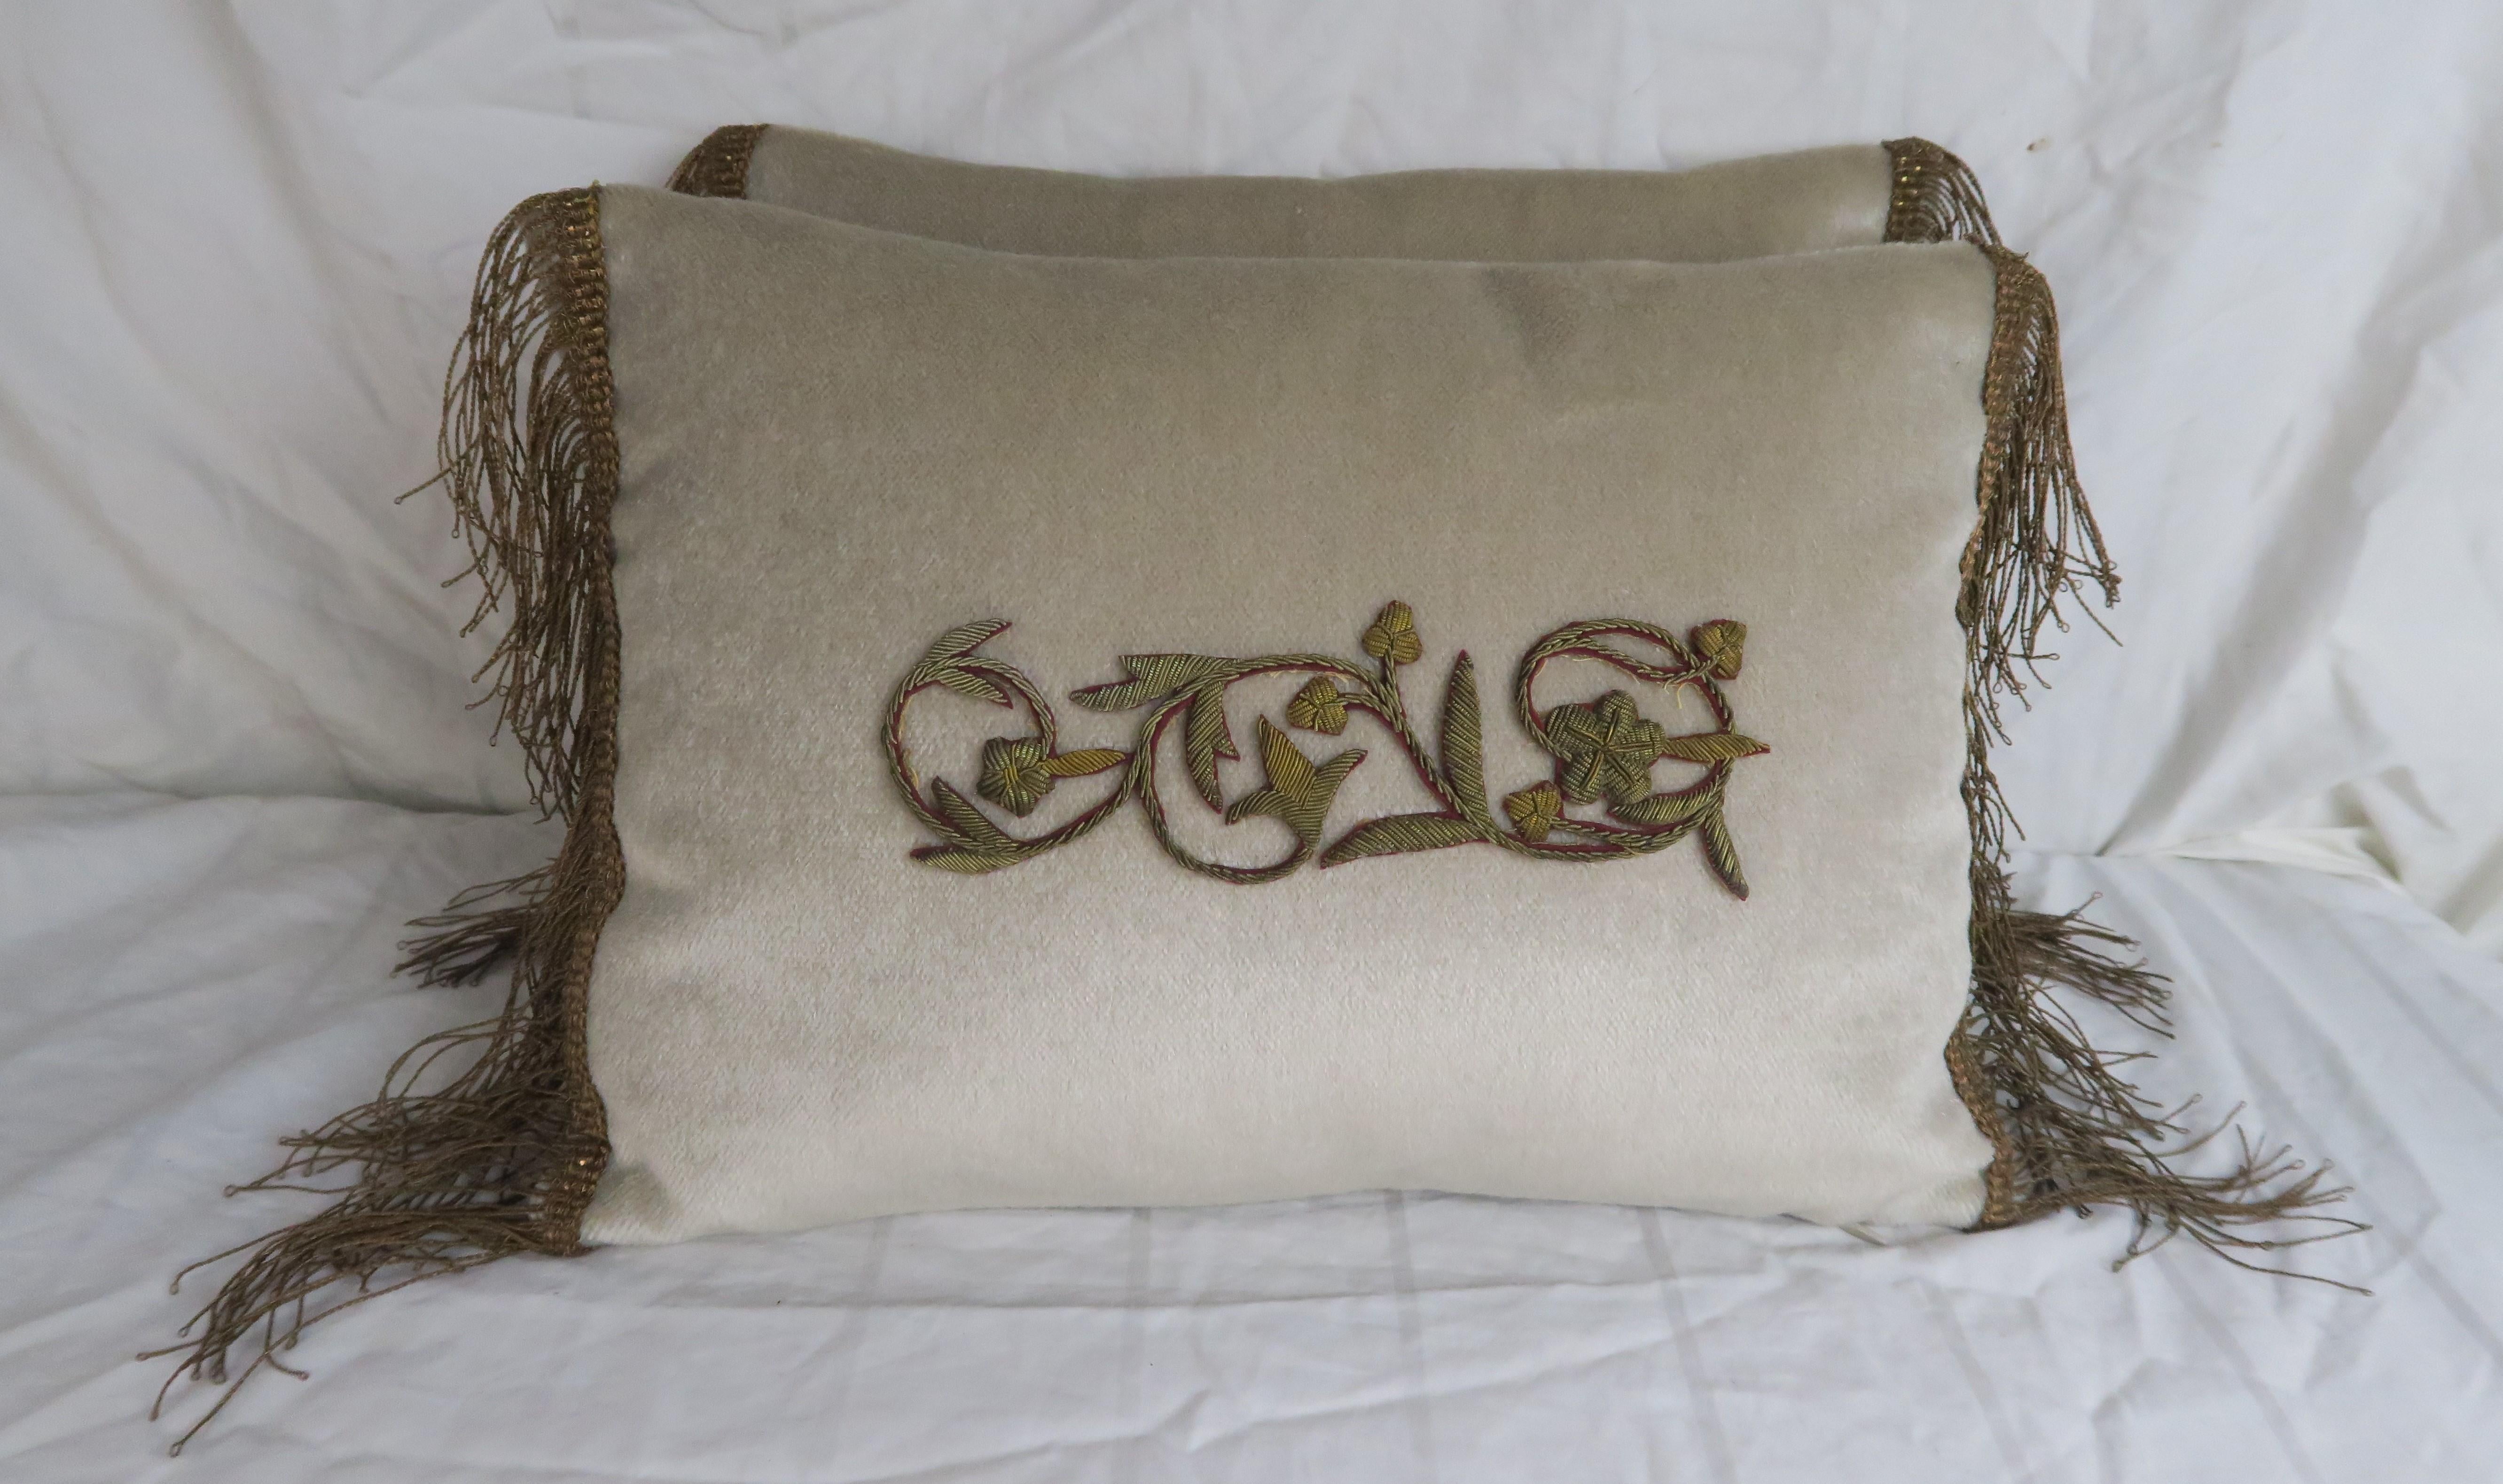 Pair of custom pillows made with 19th century metallic embroideries appliqued on silk mohair. 19th century metallic trim at sides. Golden silk backs, down inserts, zipper closures.